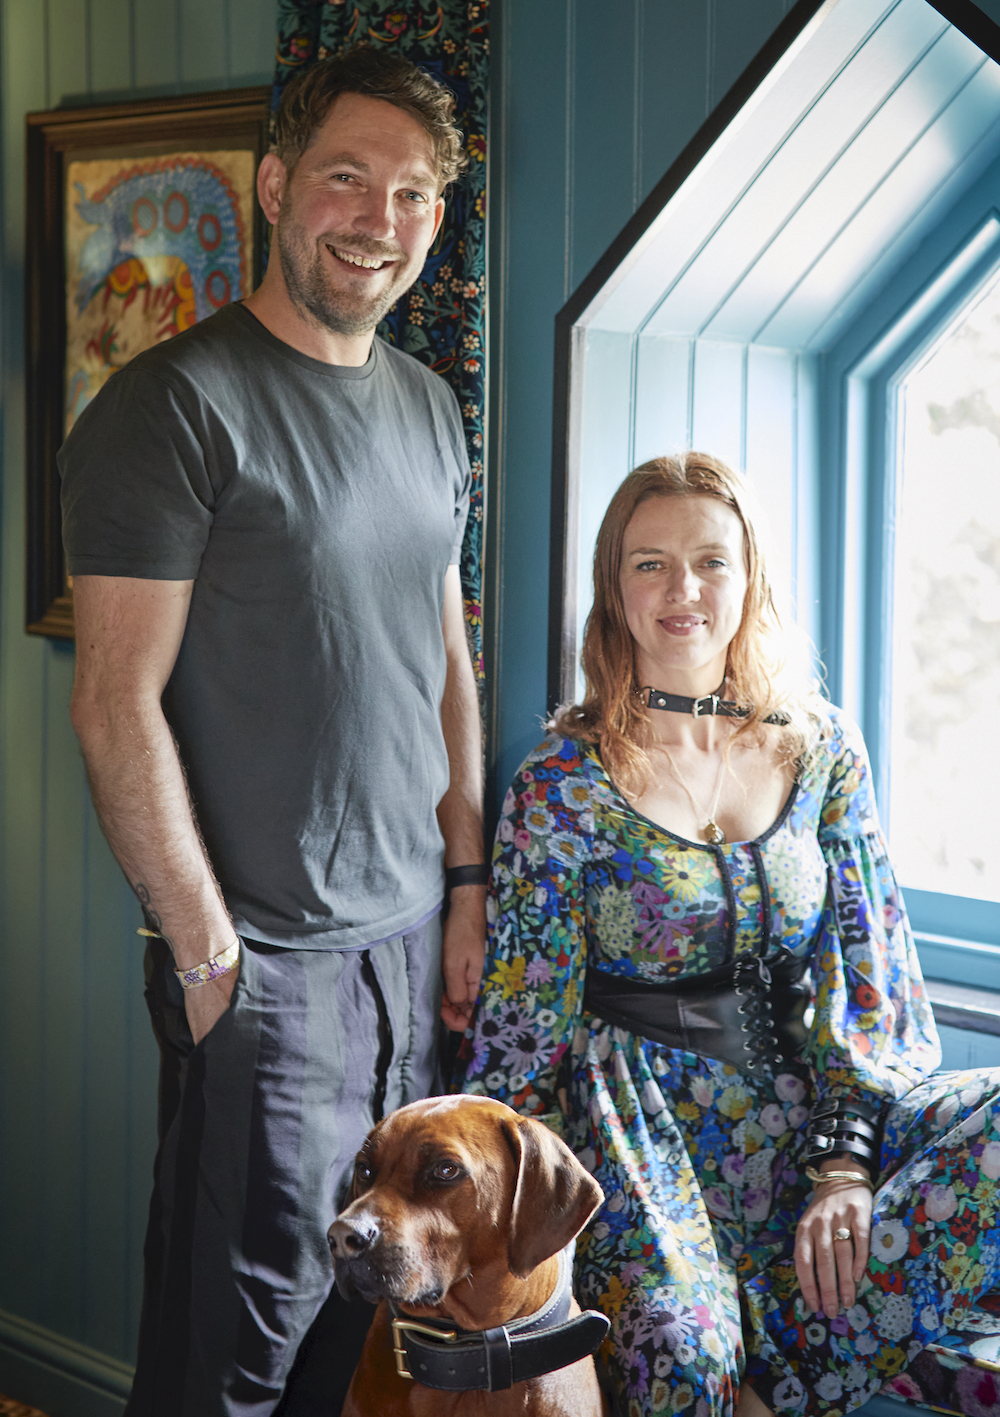 House of Hackney founders Javvy M Royle and Frieda Gormley